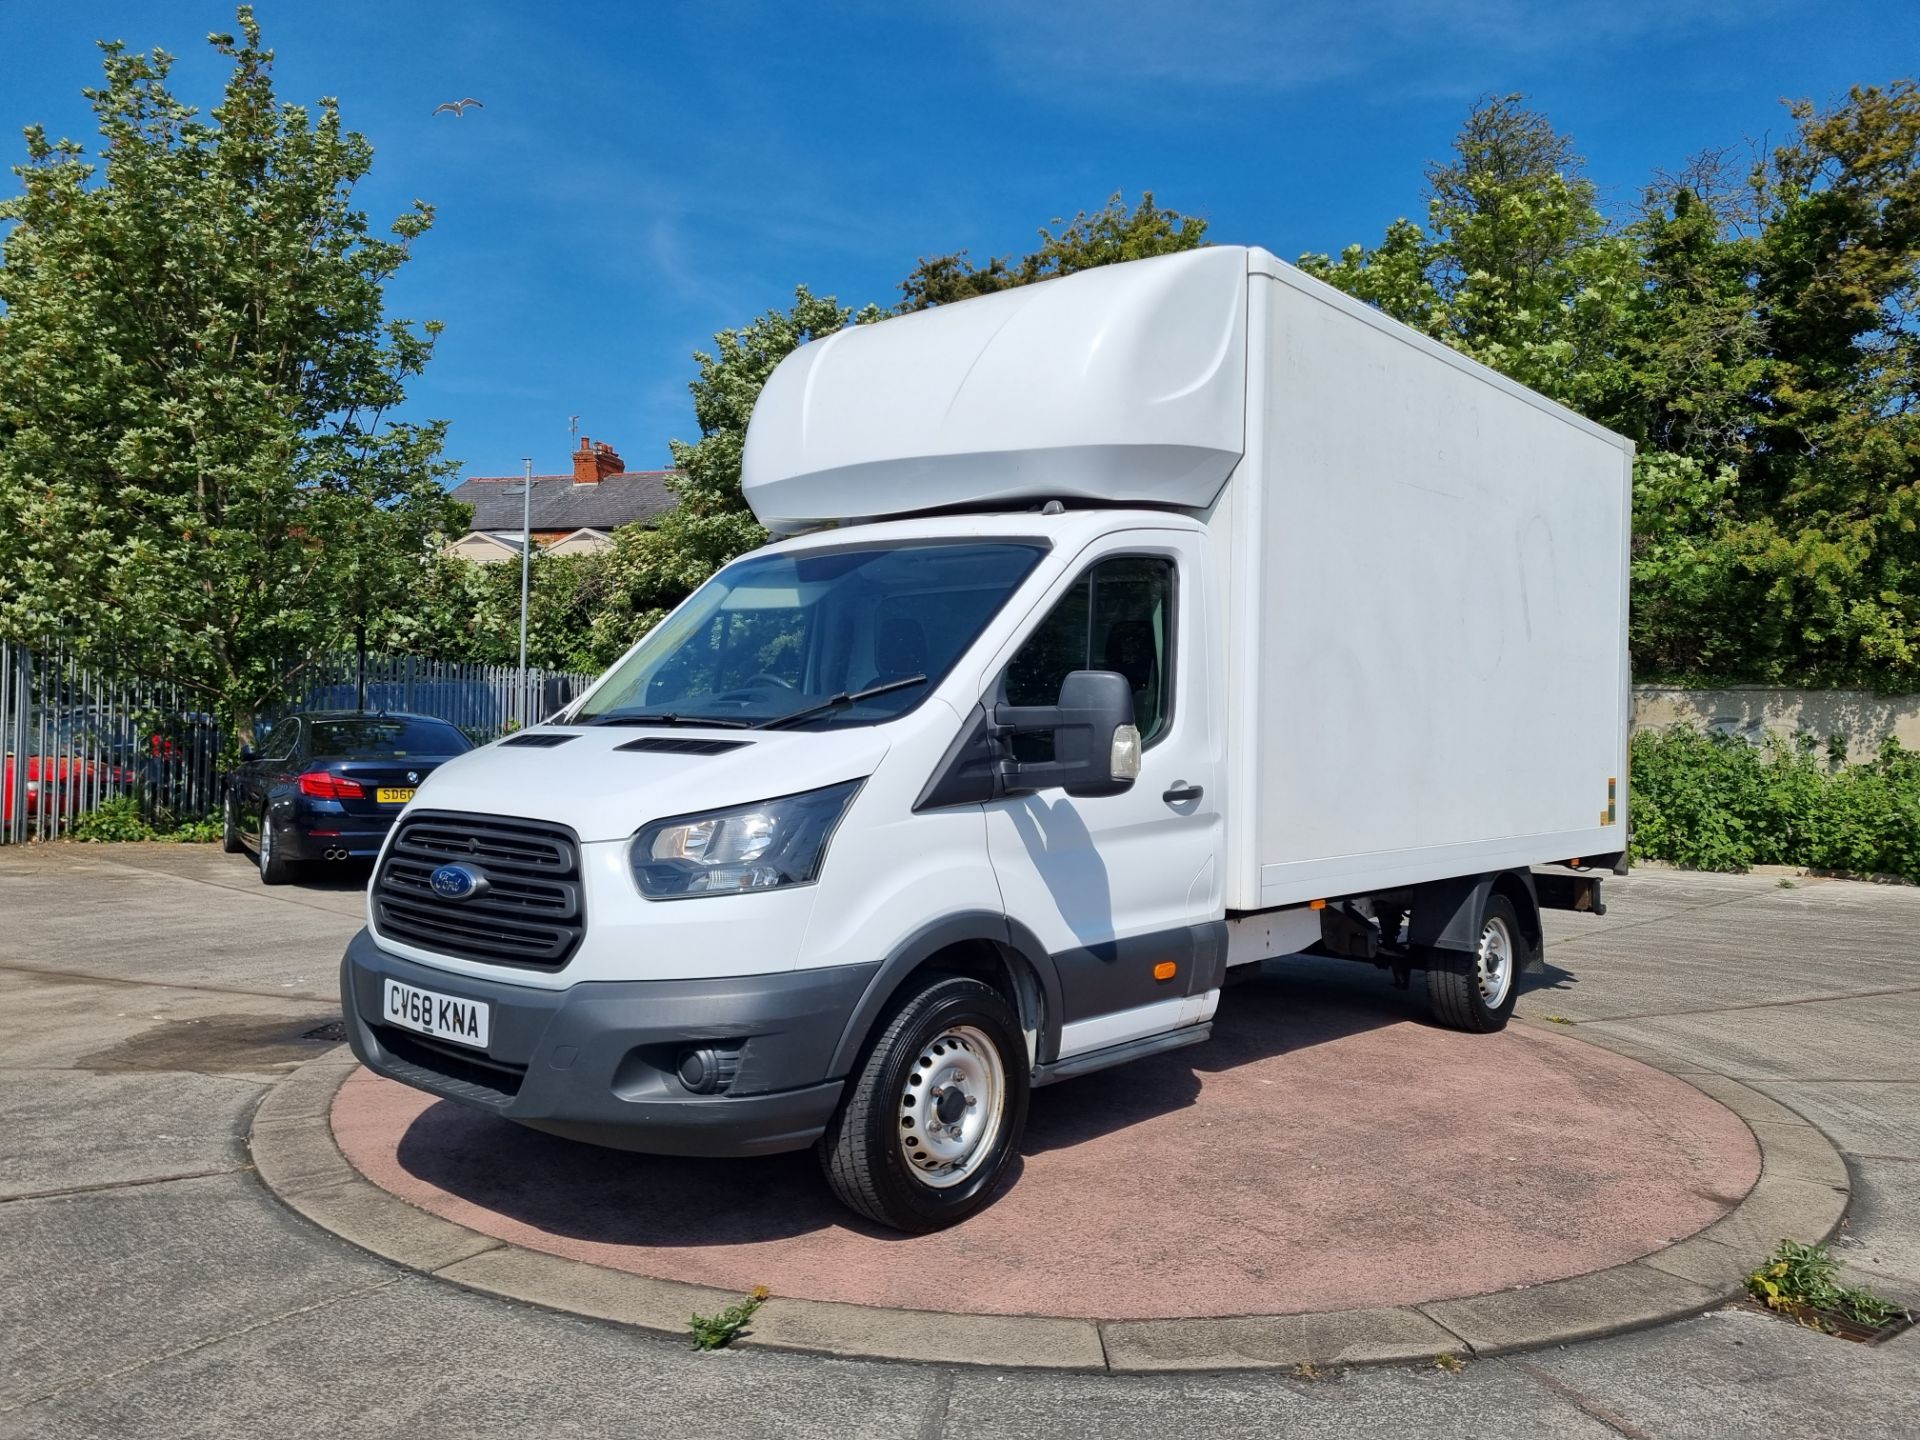 2018 Transit Luton with tail lift - Image 2 of 13